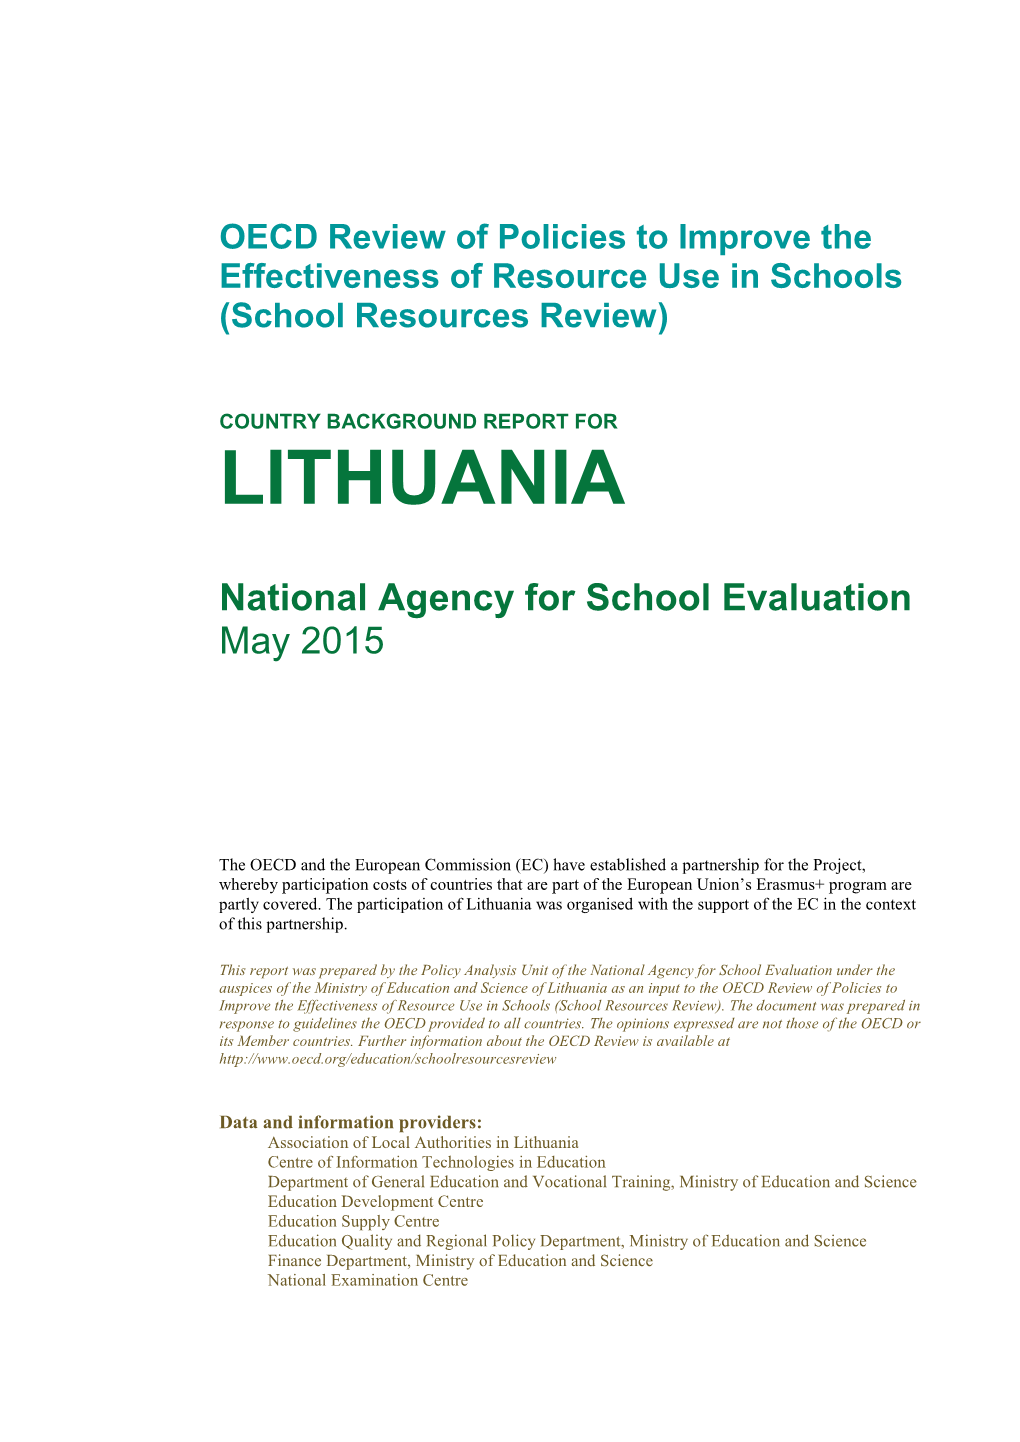 OECD Review of Policies to Improve the Effectiveness of Resource Use in Schools (School Resources Review)